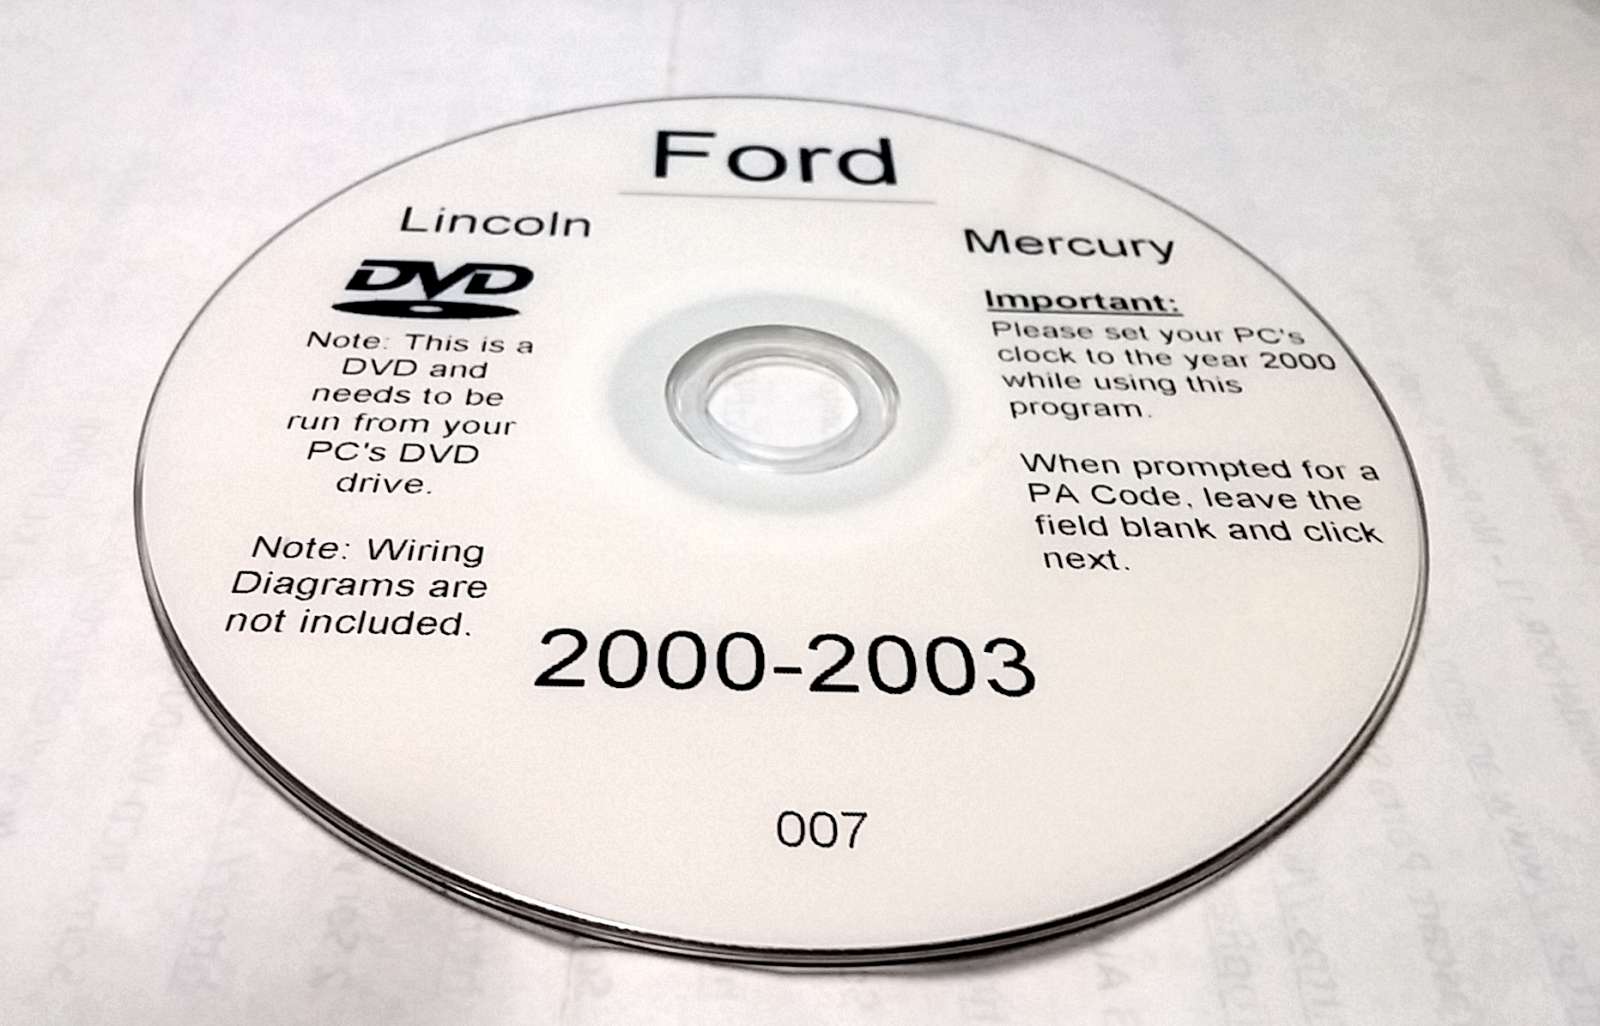 Ford 2003 Lincoln Town Car Wiring Diagrams and DVD Ford 2003 Lincoln Town Car Wiring Diagrams DVD adjustments procedures replace